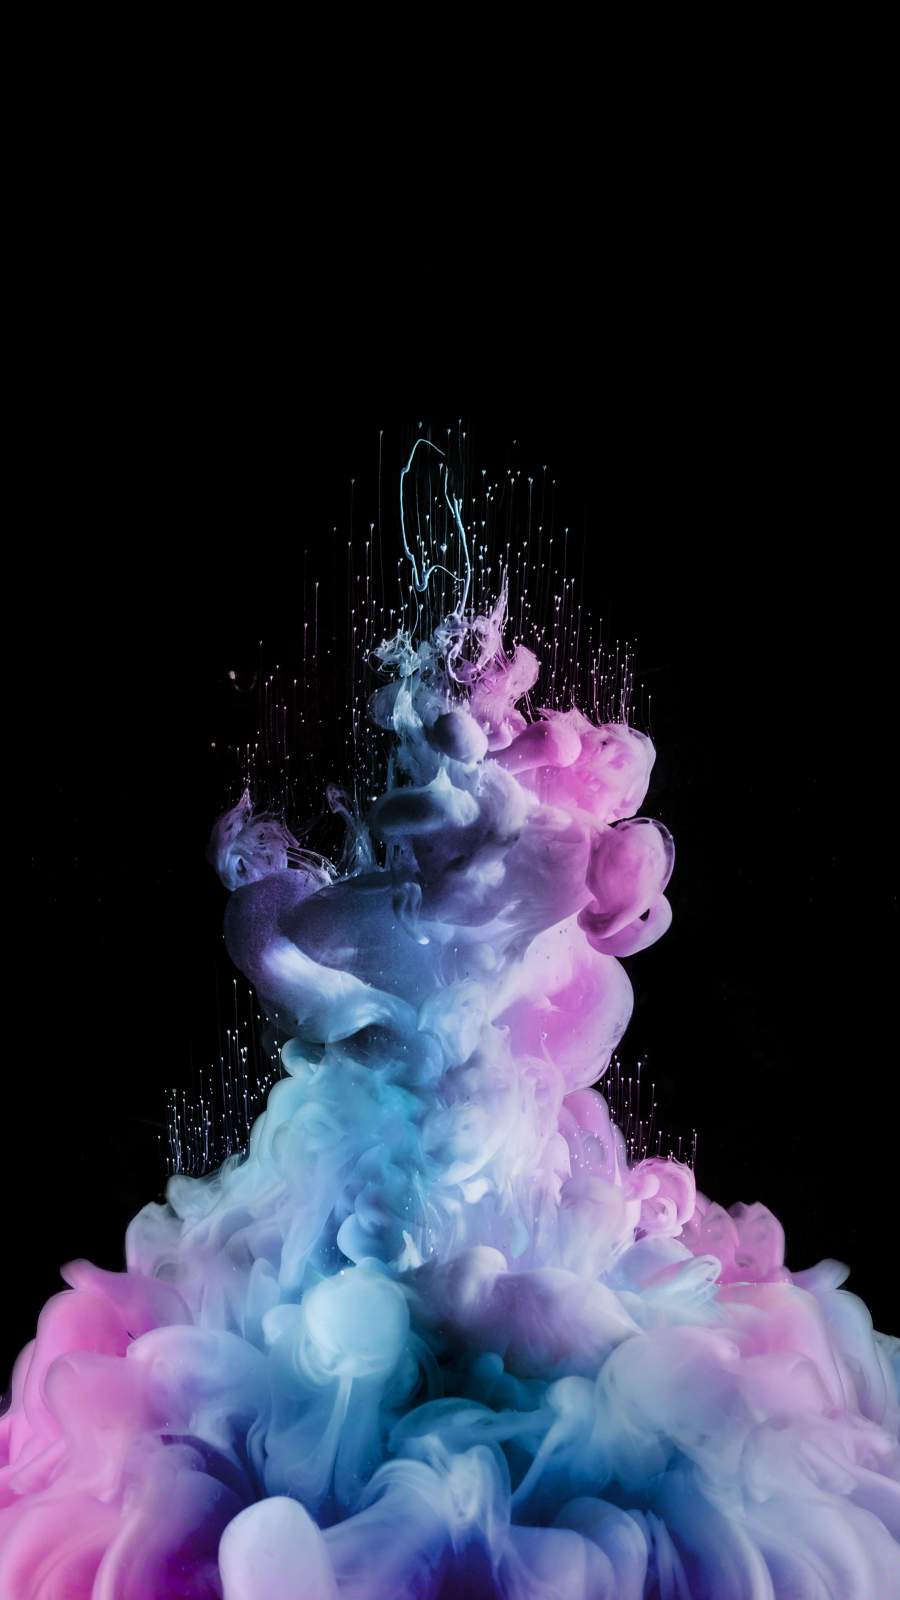 Colorful Bomb IPhone Wallpaper - IPhone Wallpapers : iPhone Wallpapers